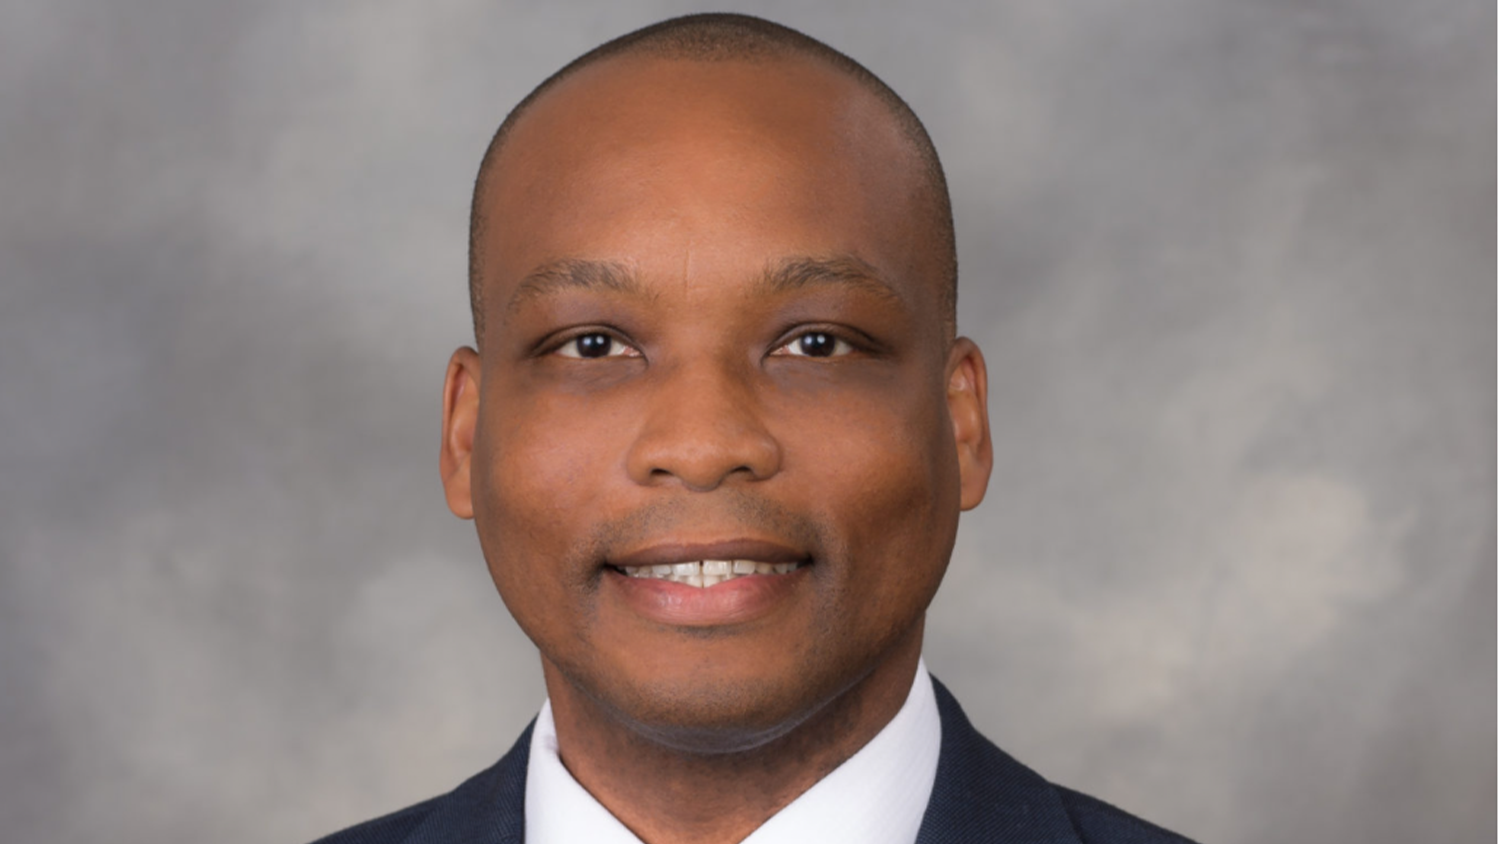 Gregory Adam Haile, who serves as the president of Broward College in Florida, will deliver the 2021 Dallas Herring Lecture.